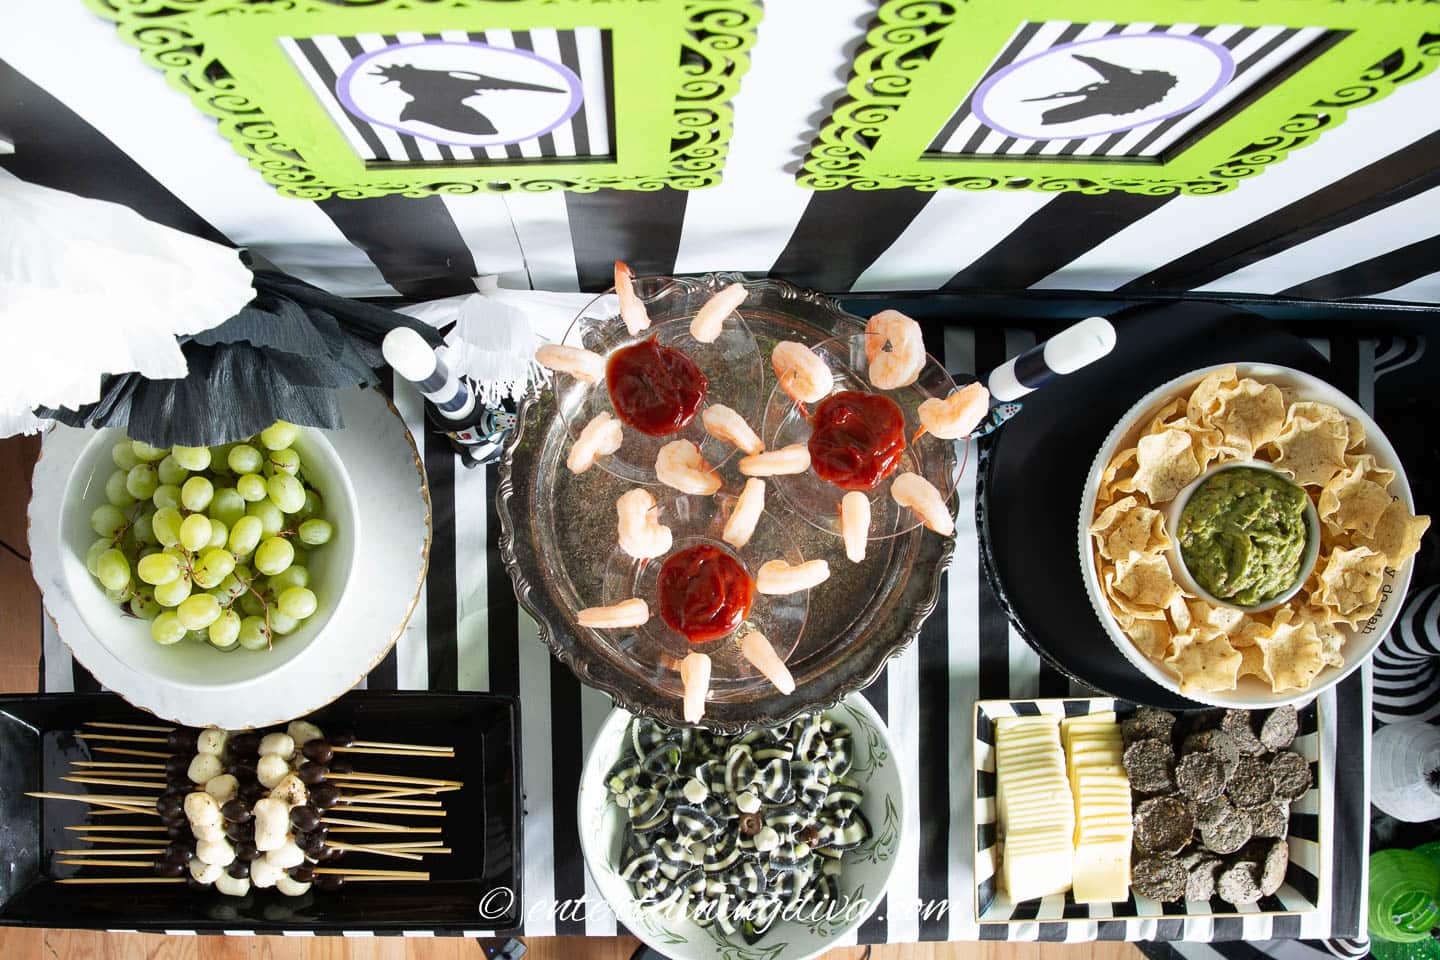 A black and white striped table with a variety of food on it for a Beetlejuice themed party